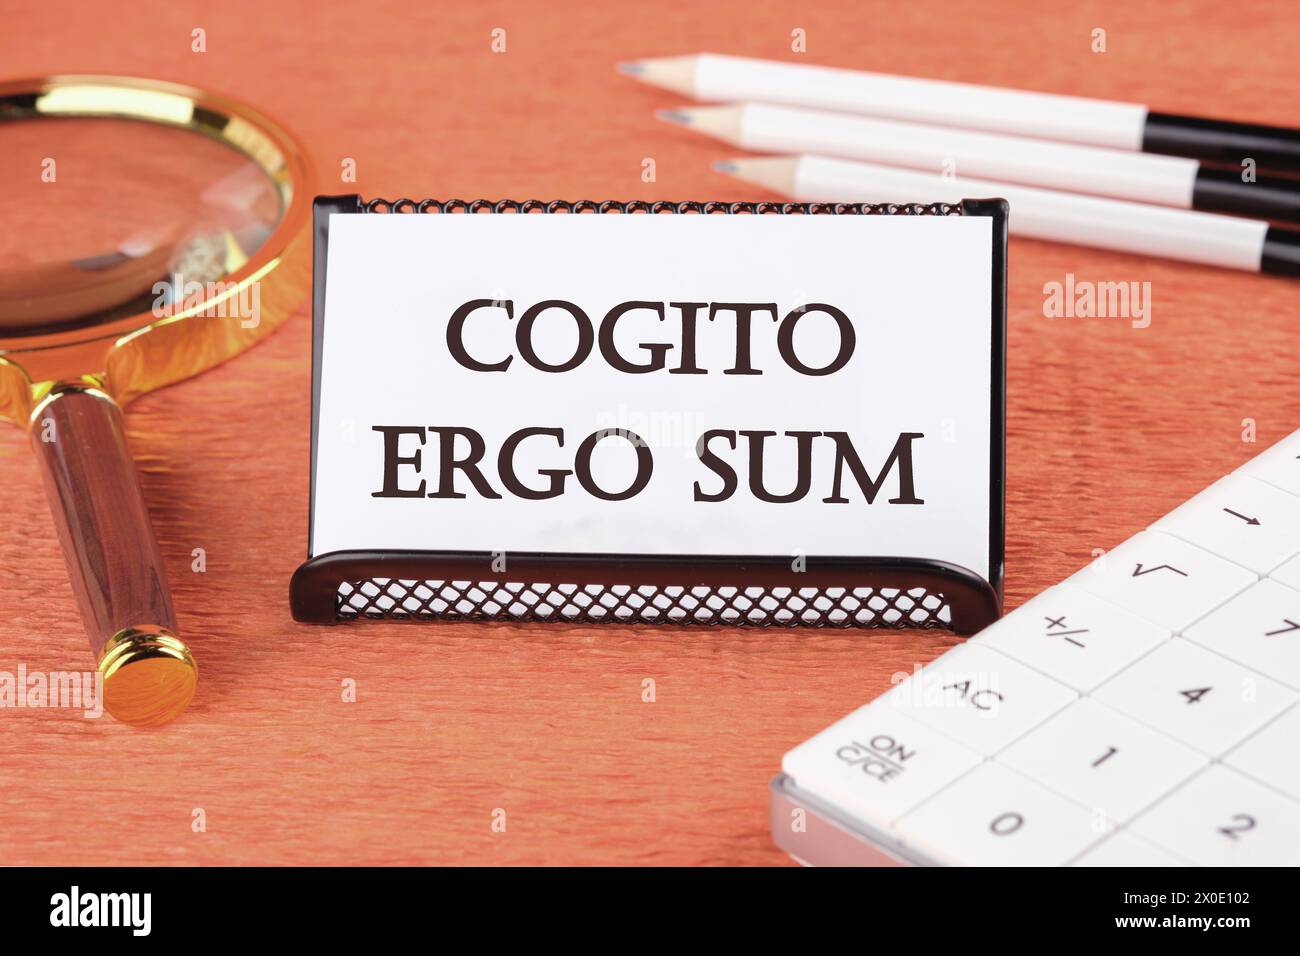 The words Cogito Ergo Sum or I think Therefore I Am there is a magnifying glass, a calculator, and pencils on a white business card next to it Stock Photo